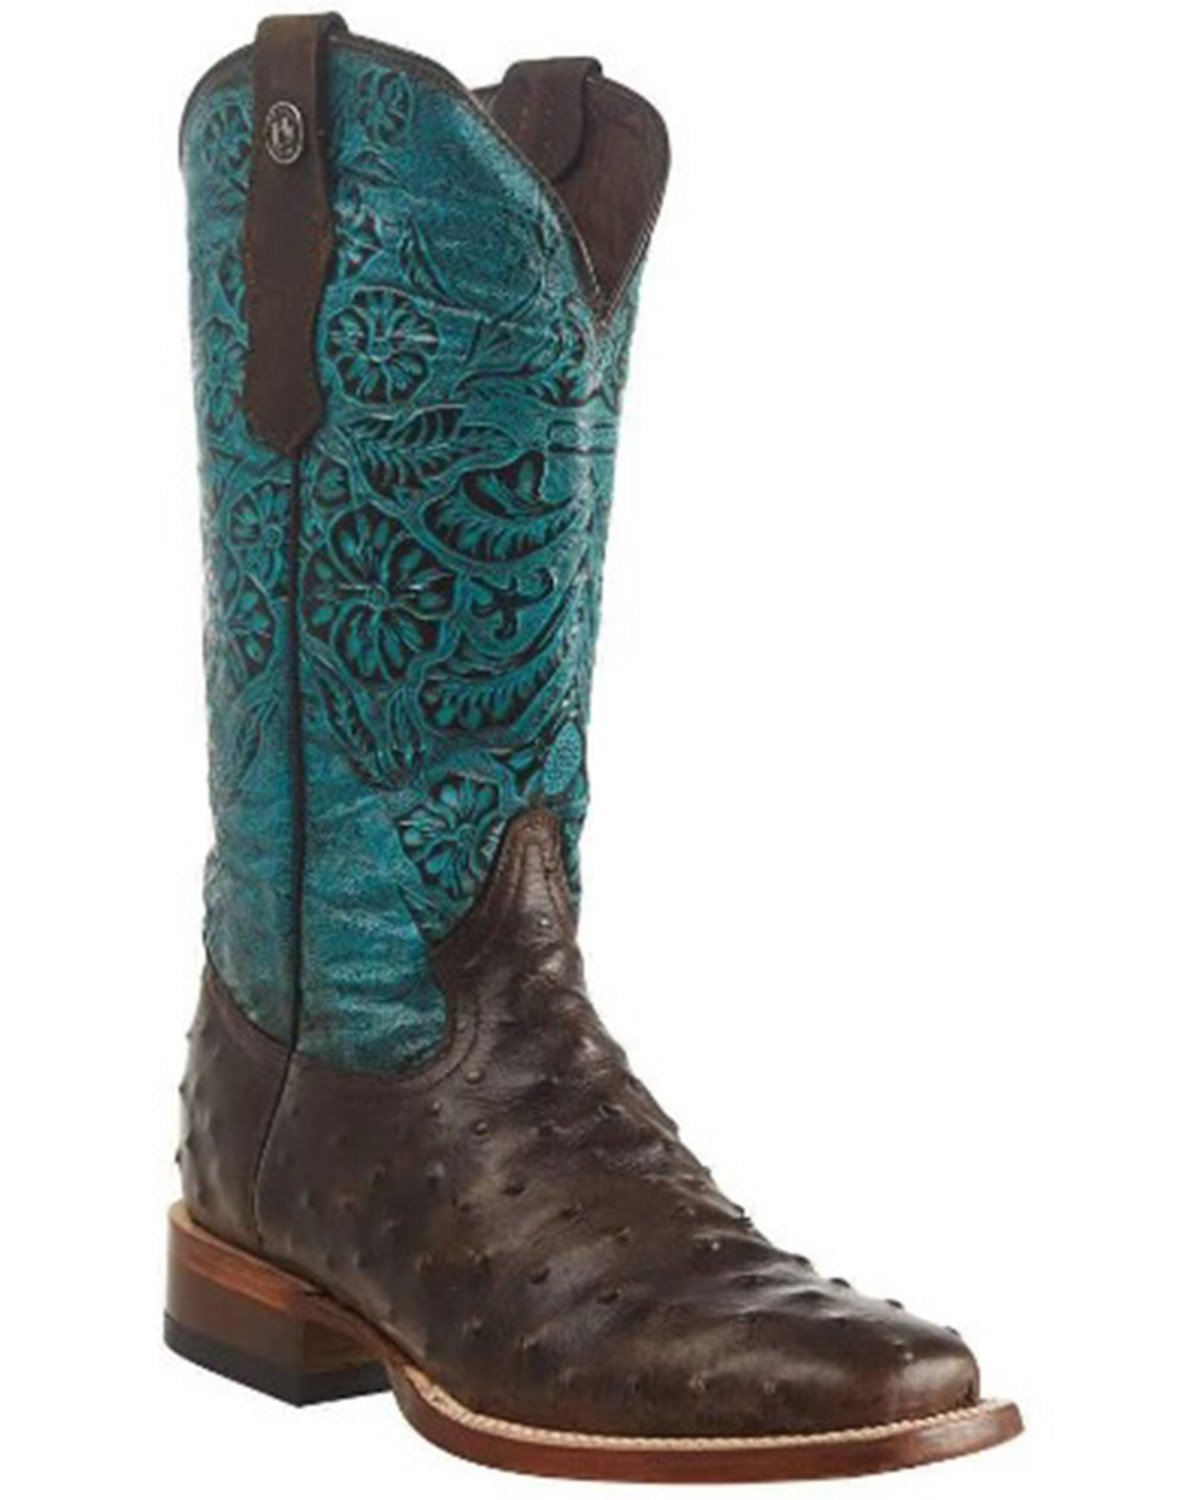 Tanner Mark Women's Ostrich Print Western Boots - Broad Square Toe